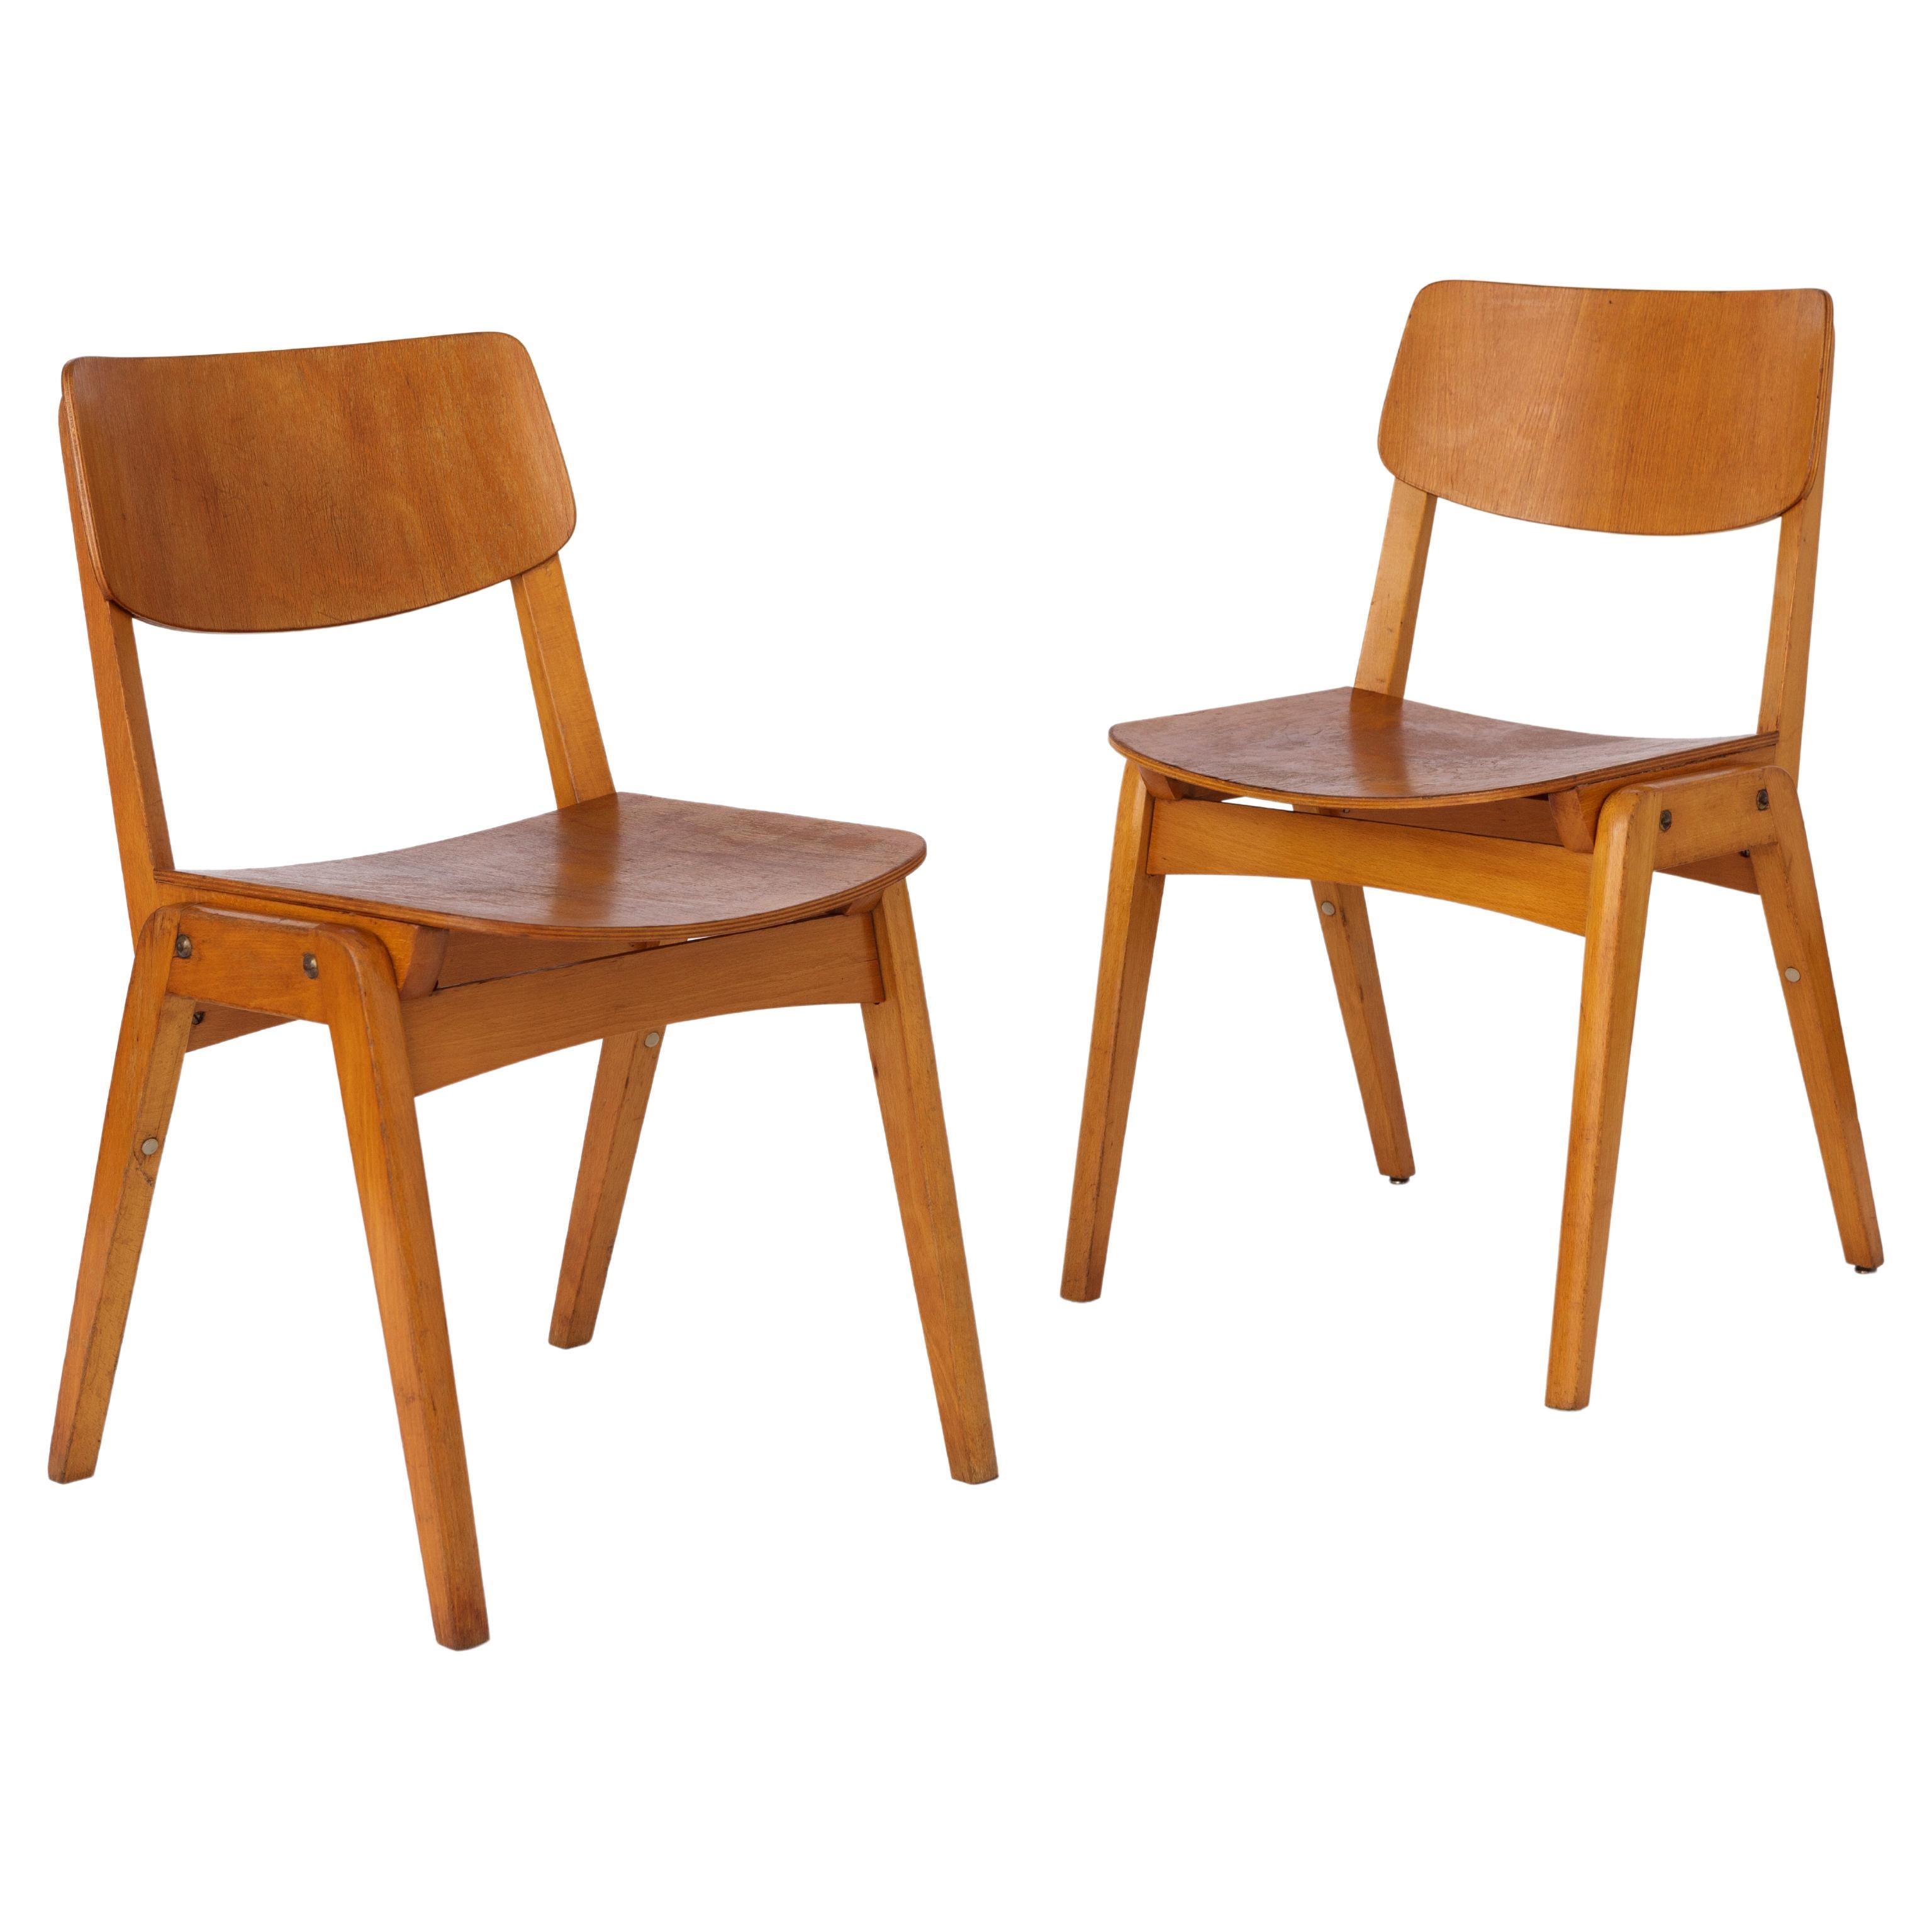 Pair Retro Chairs, 1950s-1960s Vintage Germany For Sale